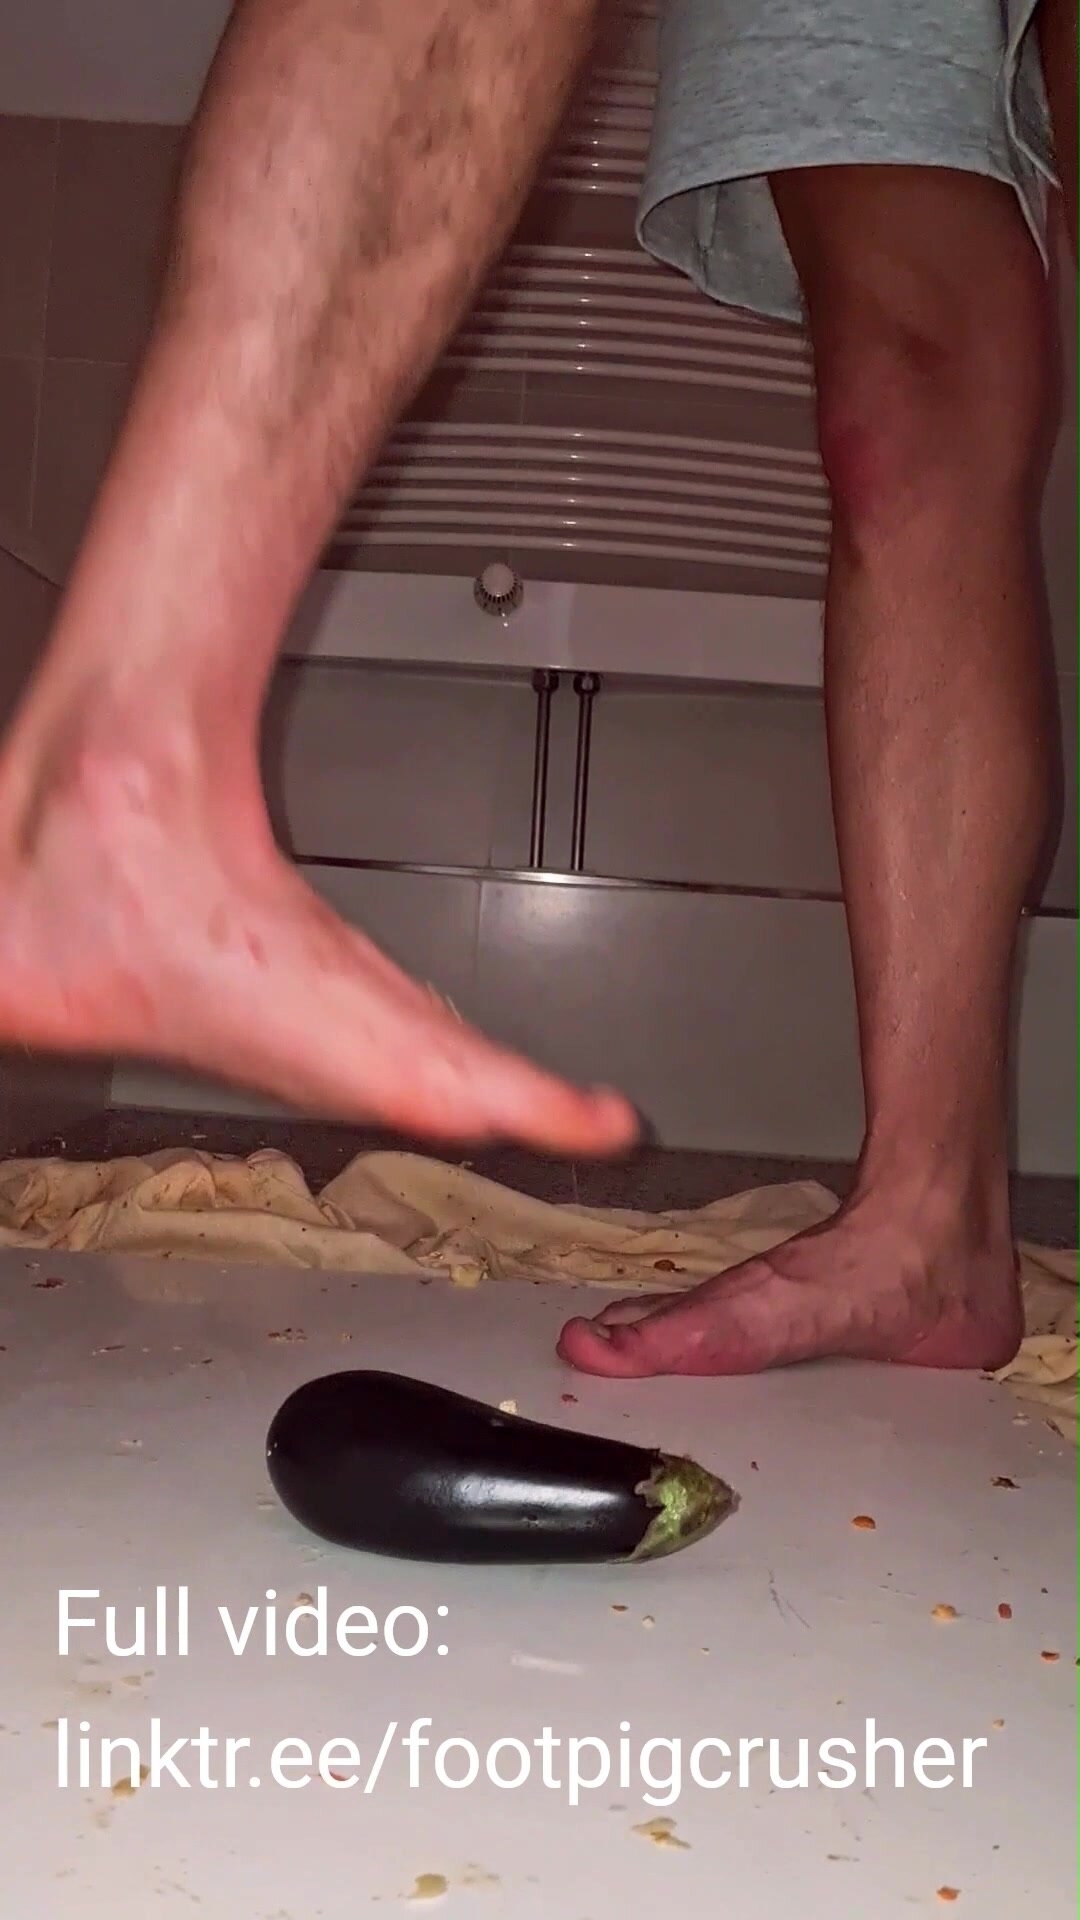 Bro and me crushing your cock under our naked feet